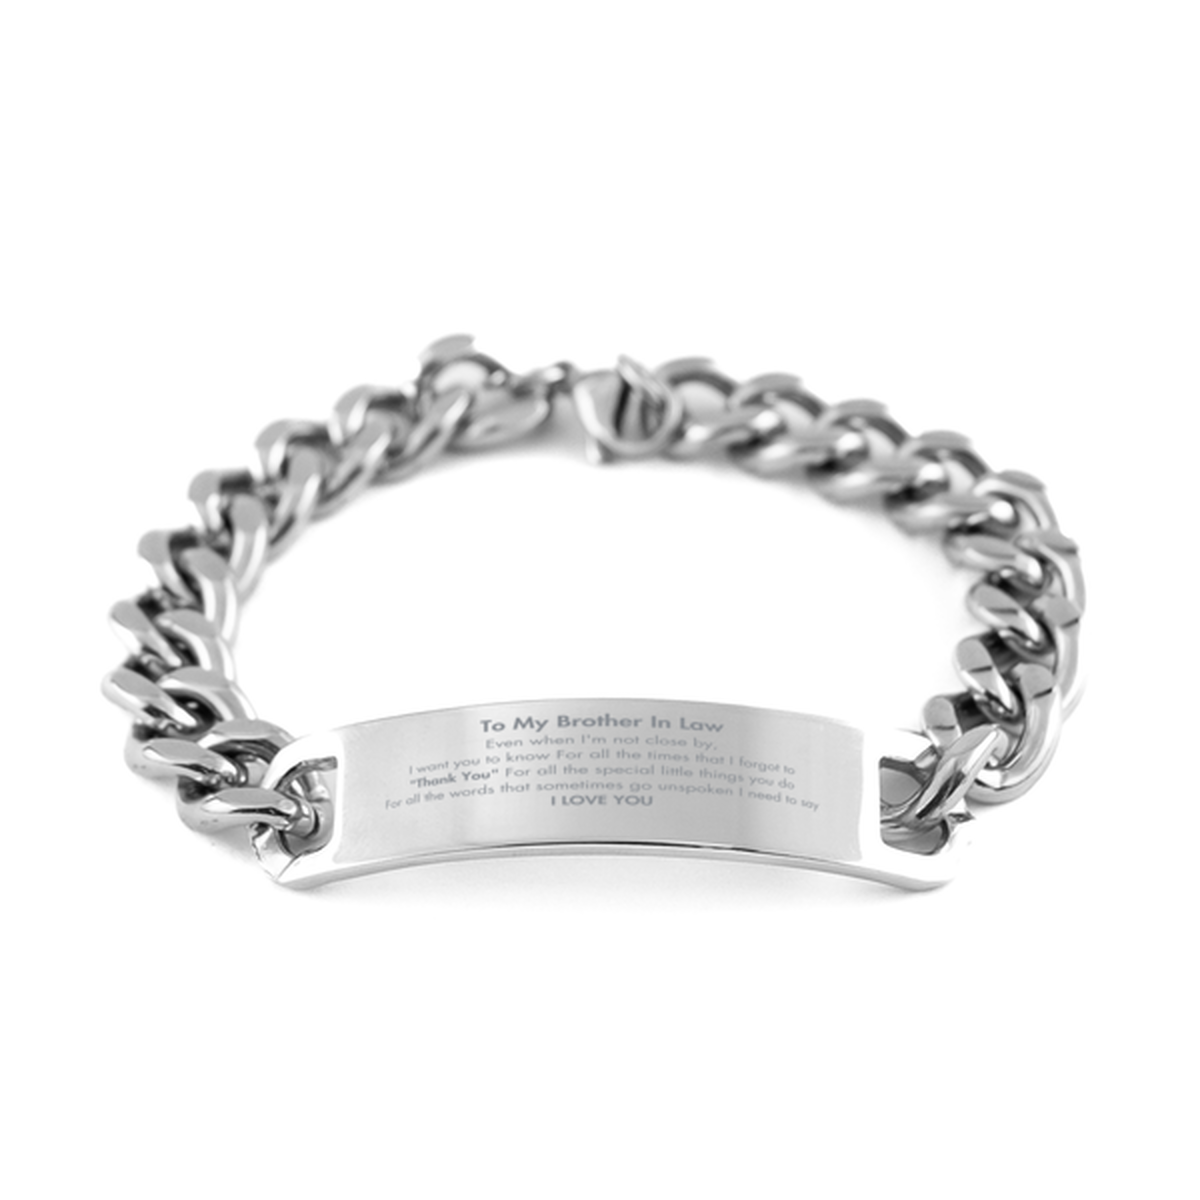 Thank You Gifts for Brother In Law, Keepsake Cuban Chain Stainless Steel Bracelet Gifts for Brother In Law Birthday Mother's day Father's Day Brother In Law For all the words That sometimes go unspoken I need to say I LOVE YOU